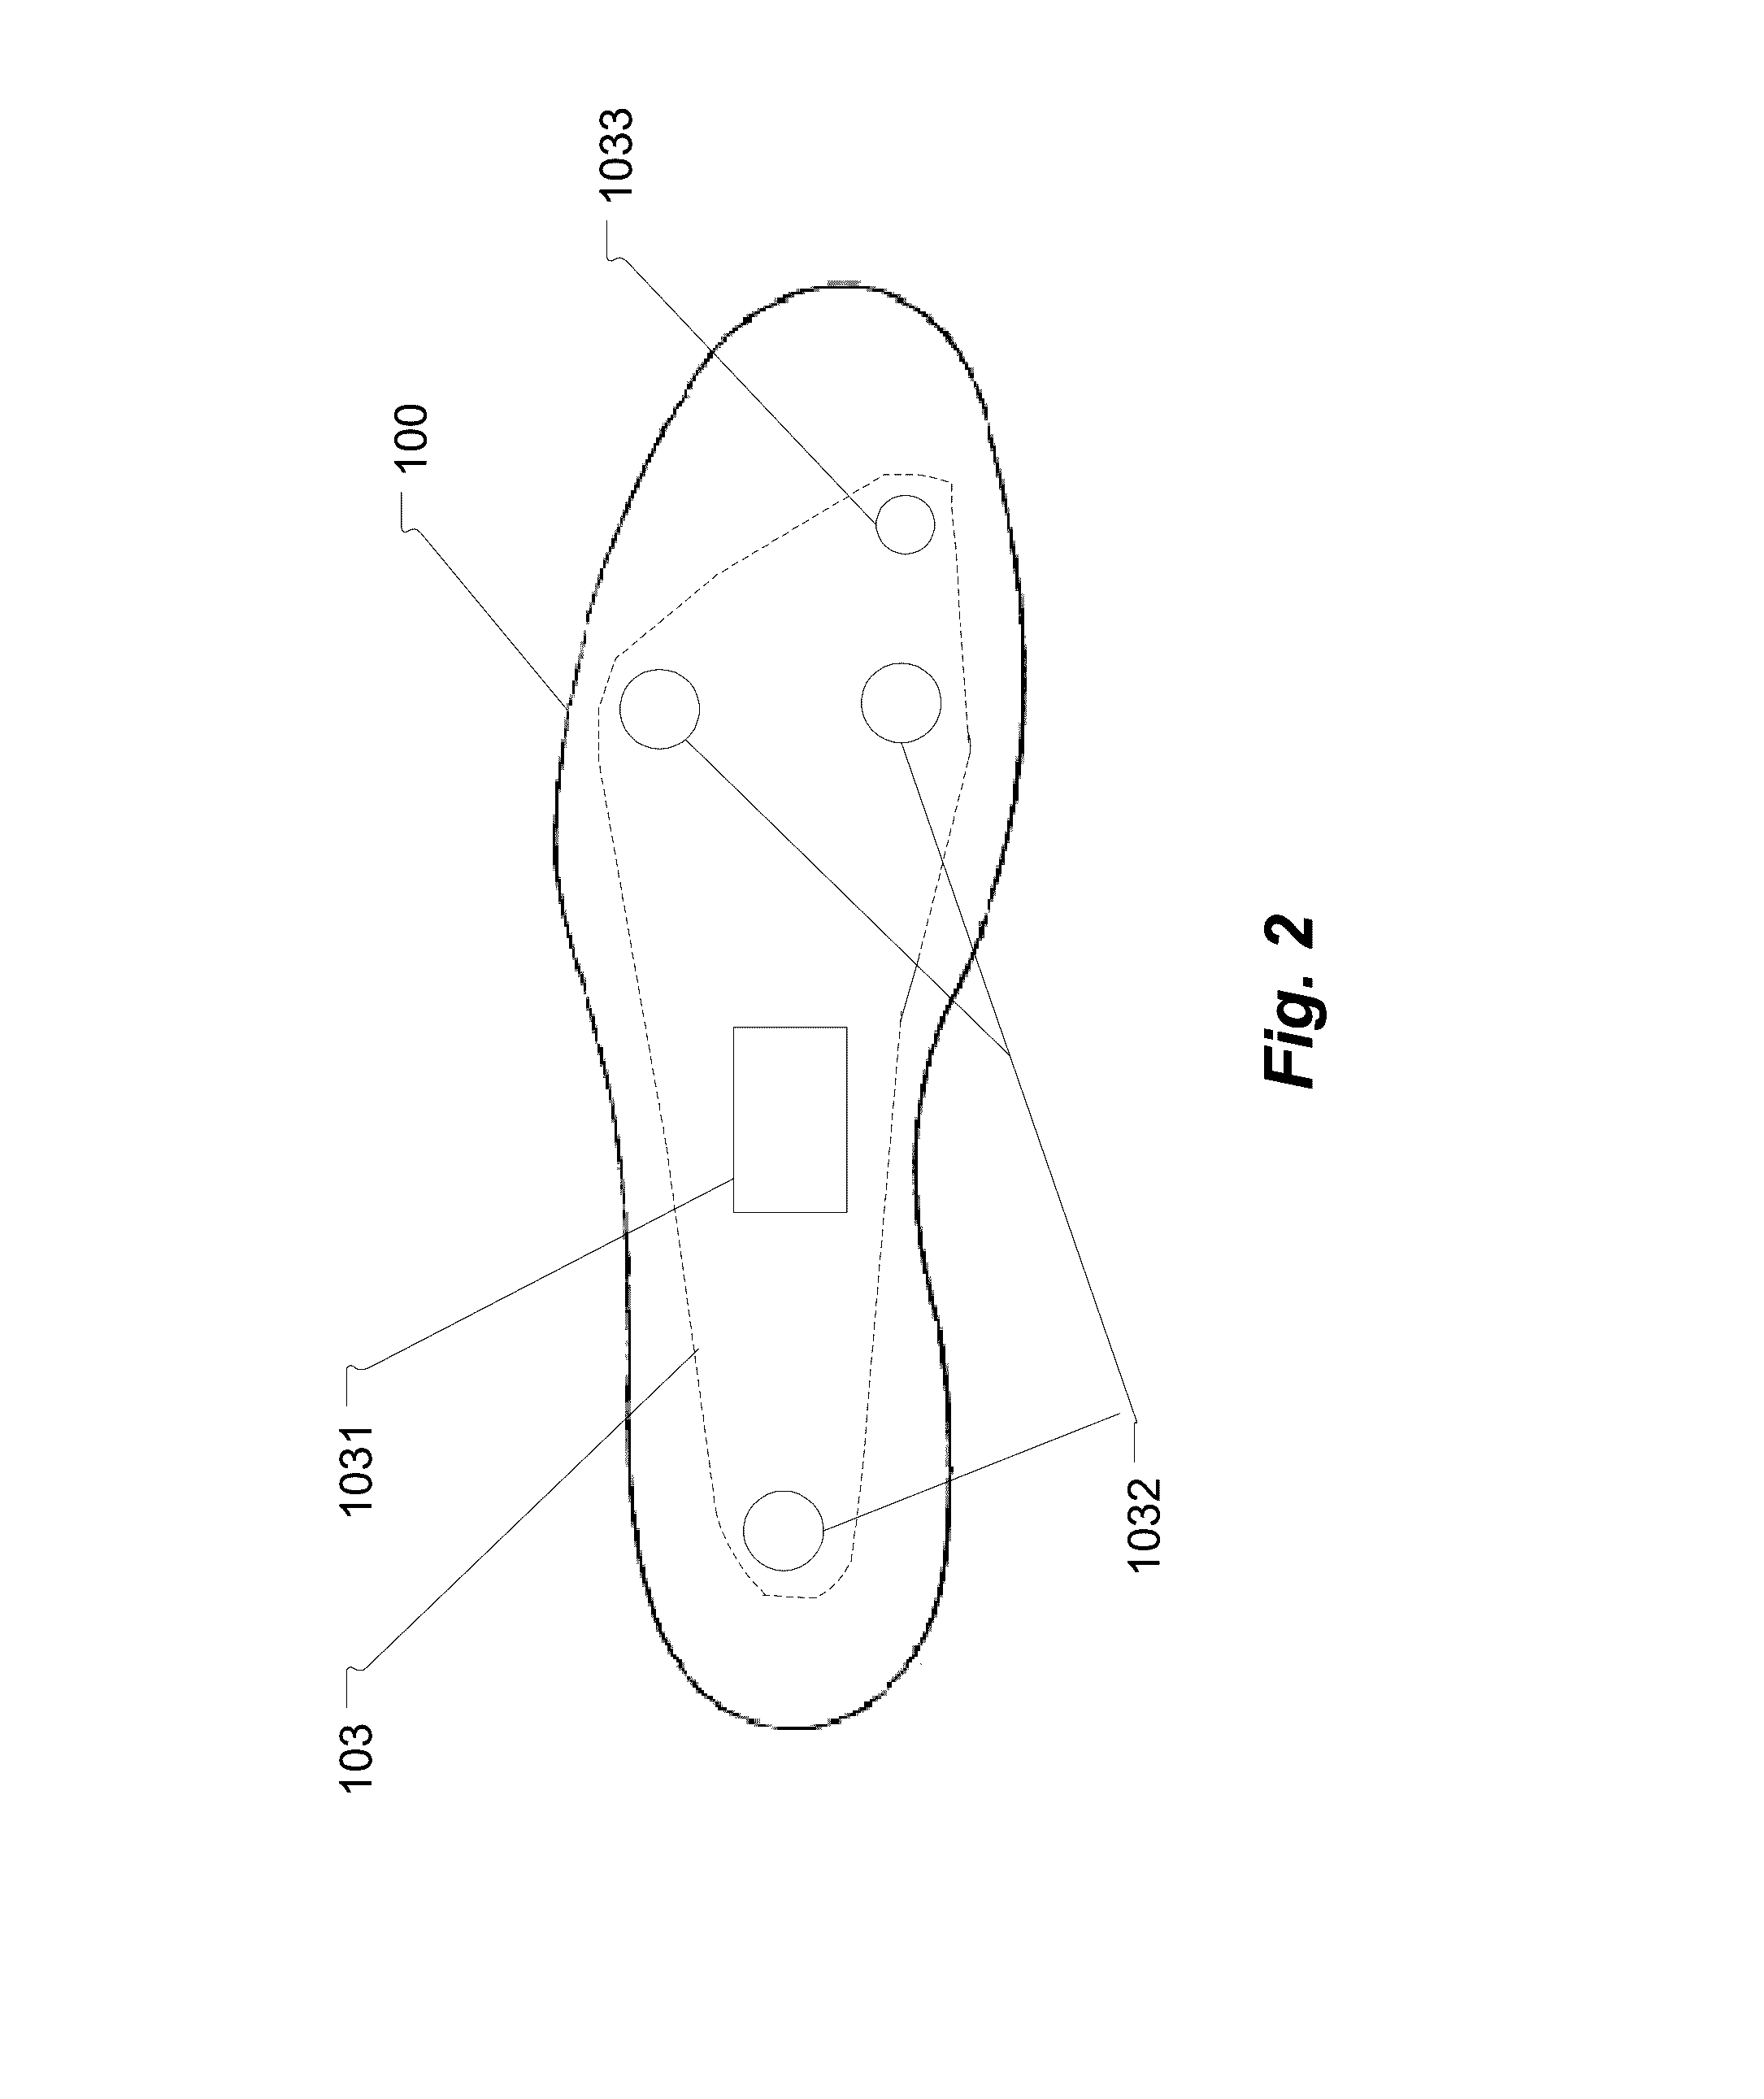 Method and Apparatus to Provide Haptic and Visual Feedback Of Skier Foot Motion and Forces Transmitted to the Ski Boot